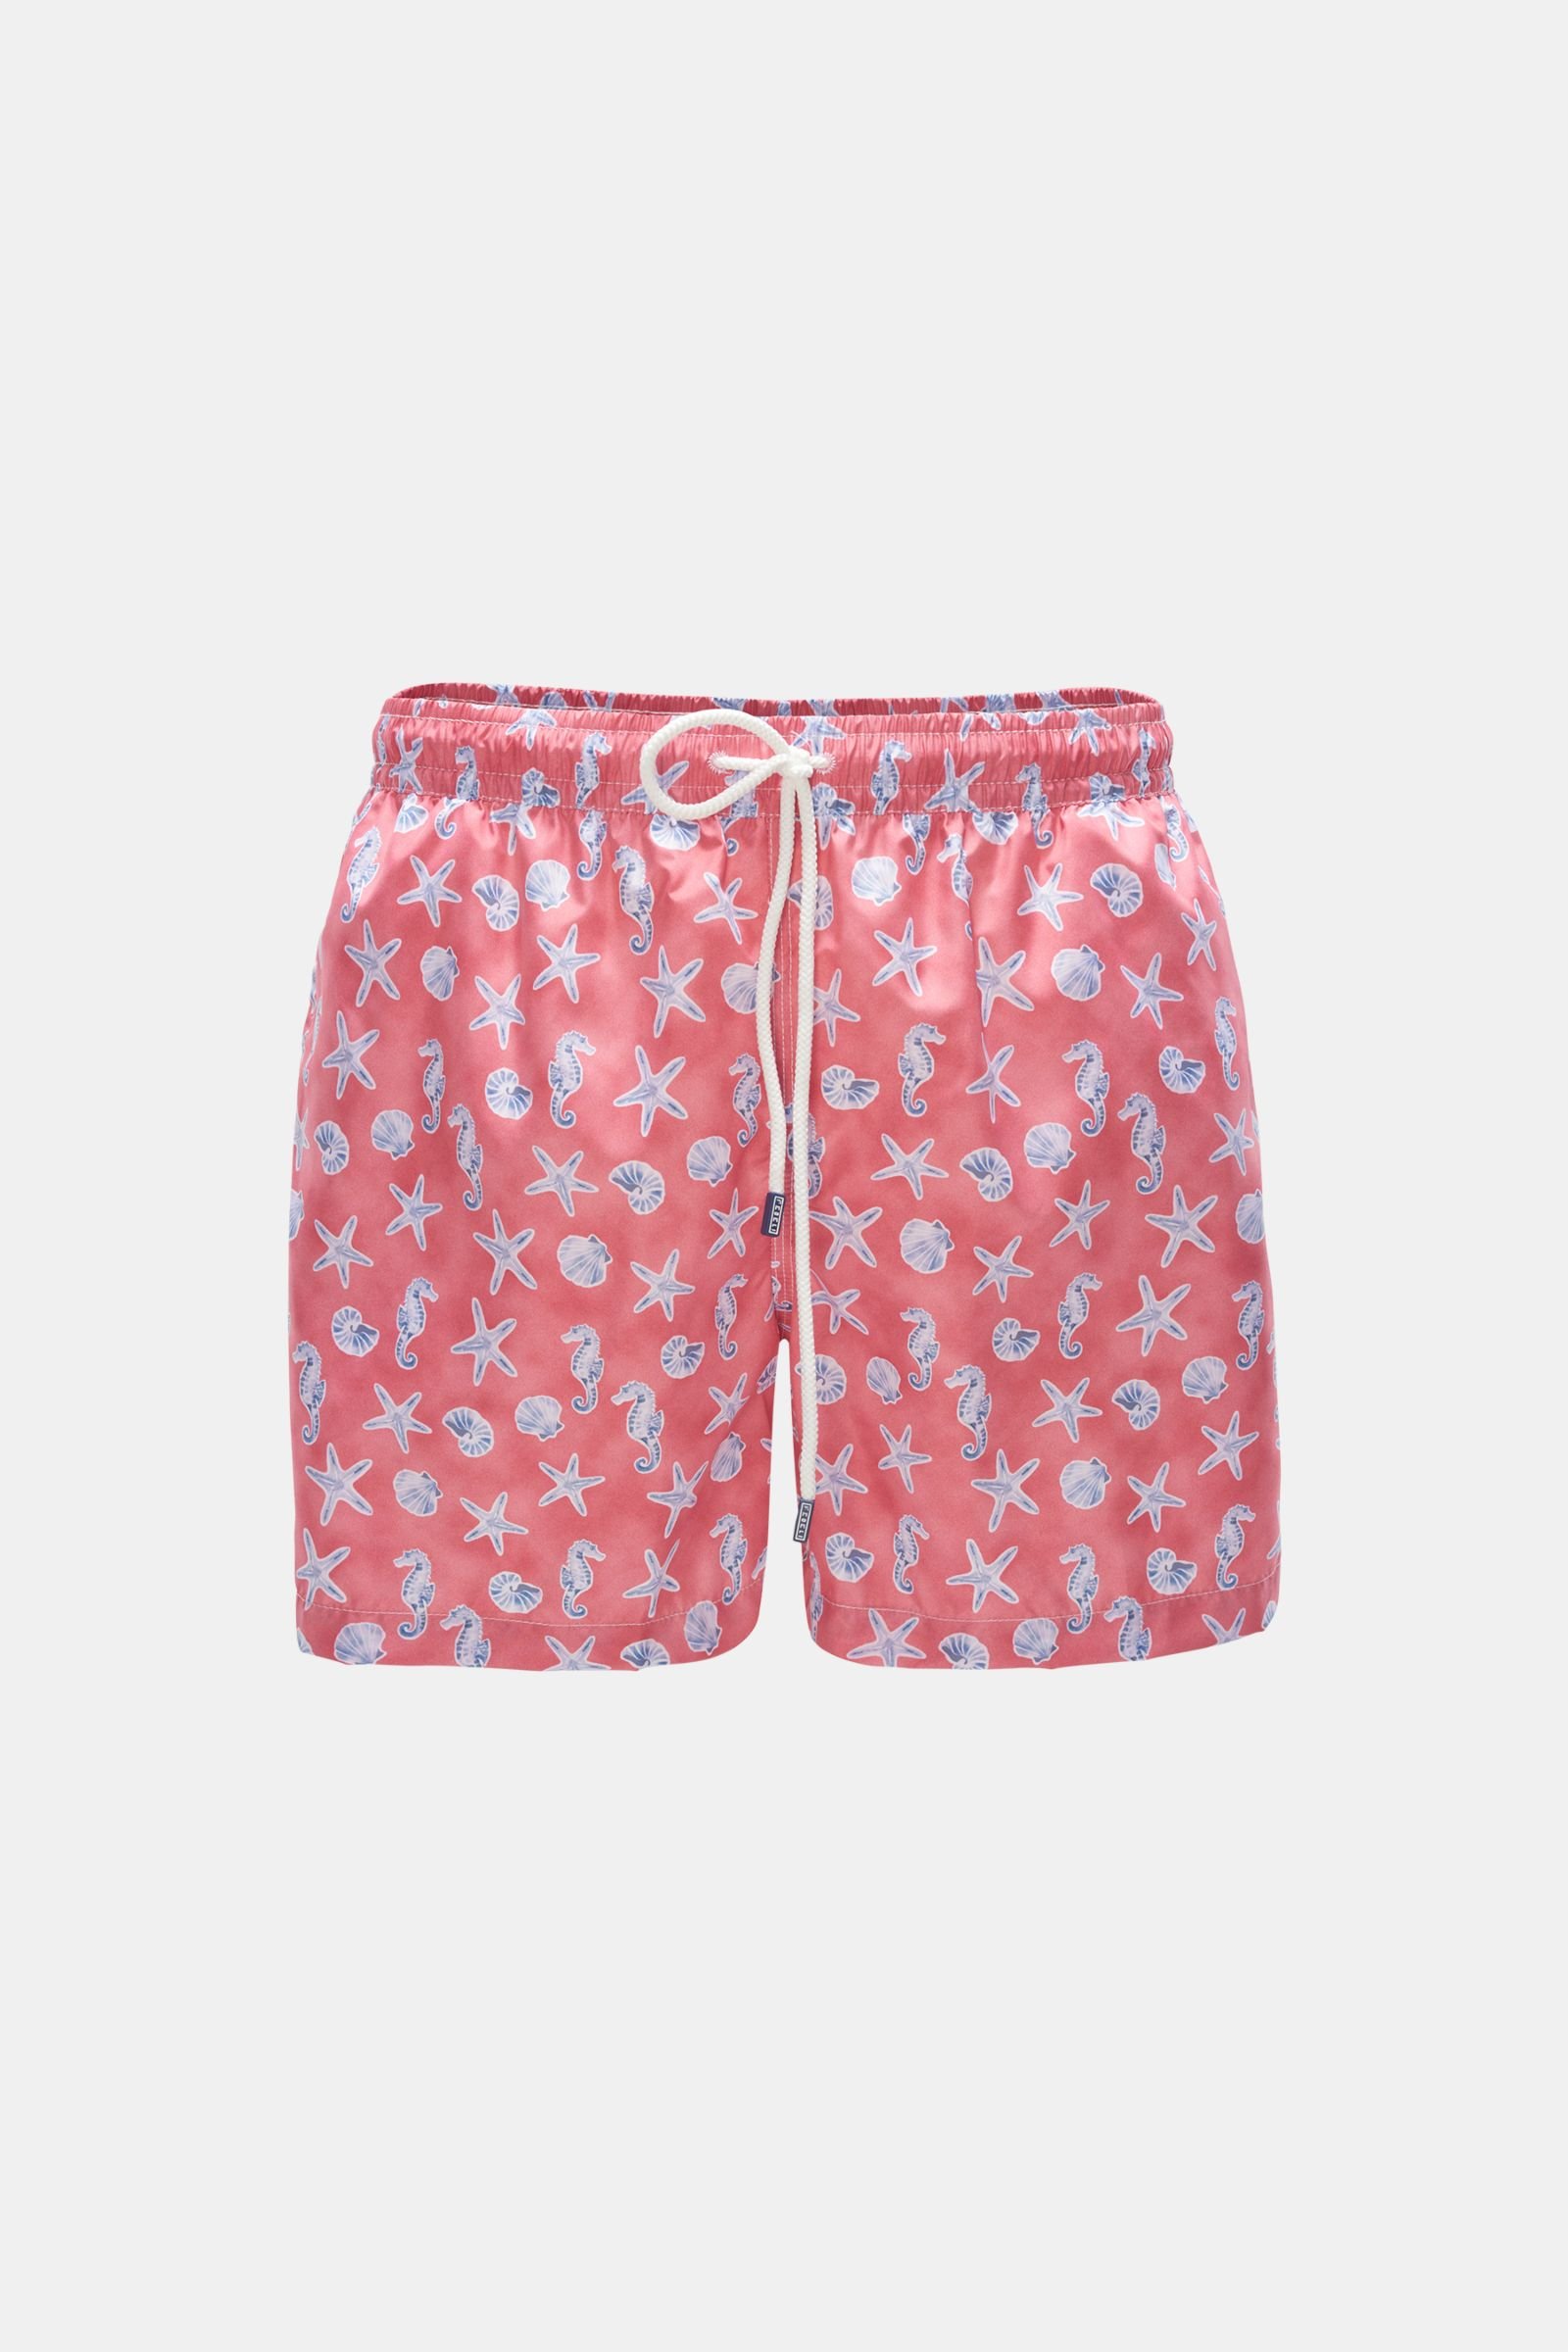 Swim shorts 'Madeira Airstop' light red patterned